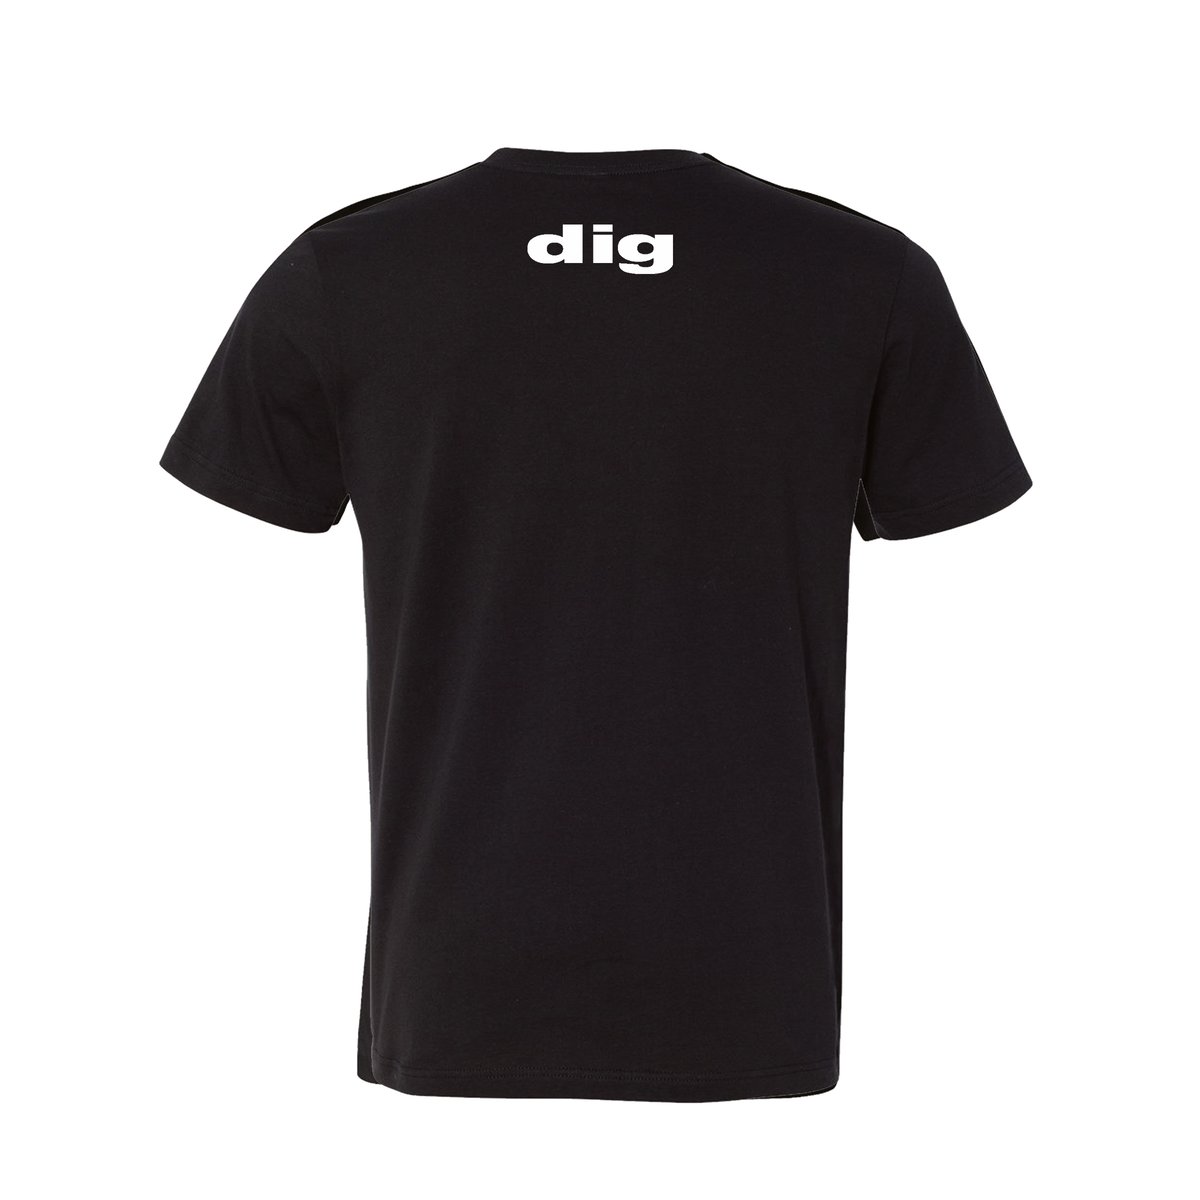 Image of official - dig - unisex "TREATMENT" black shirt